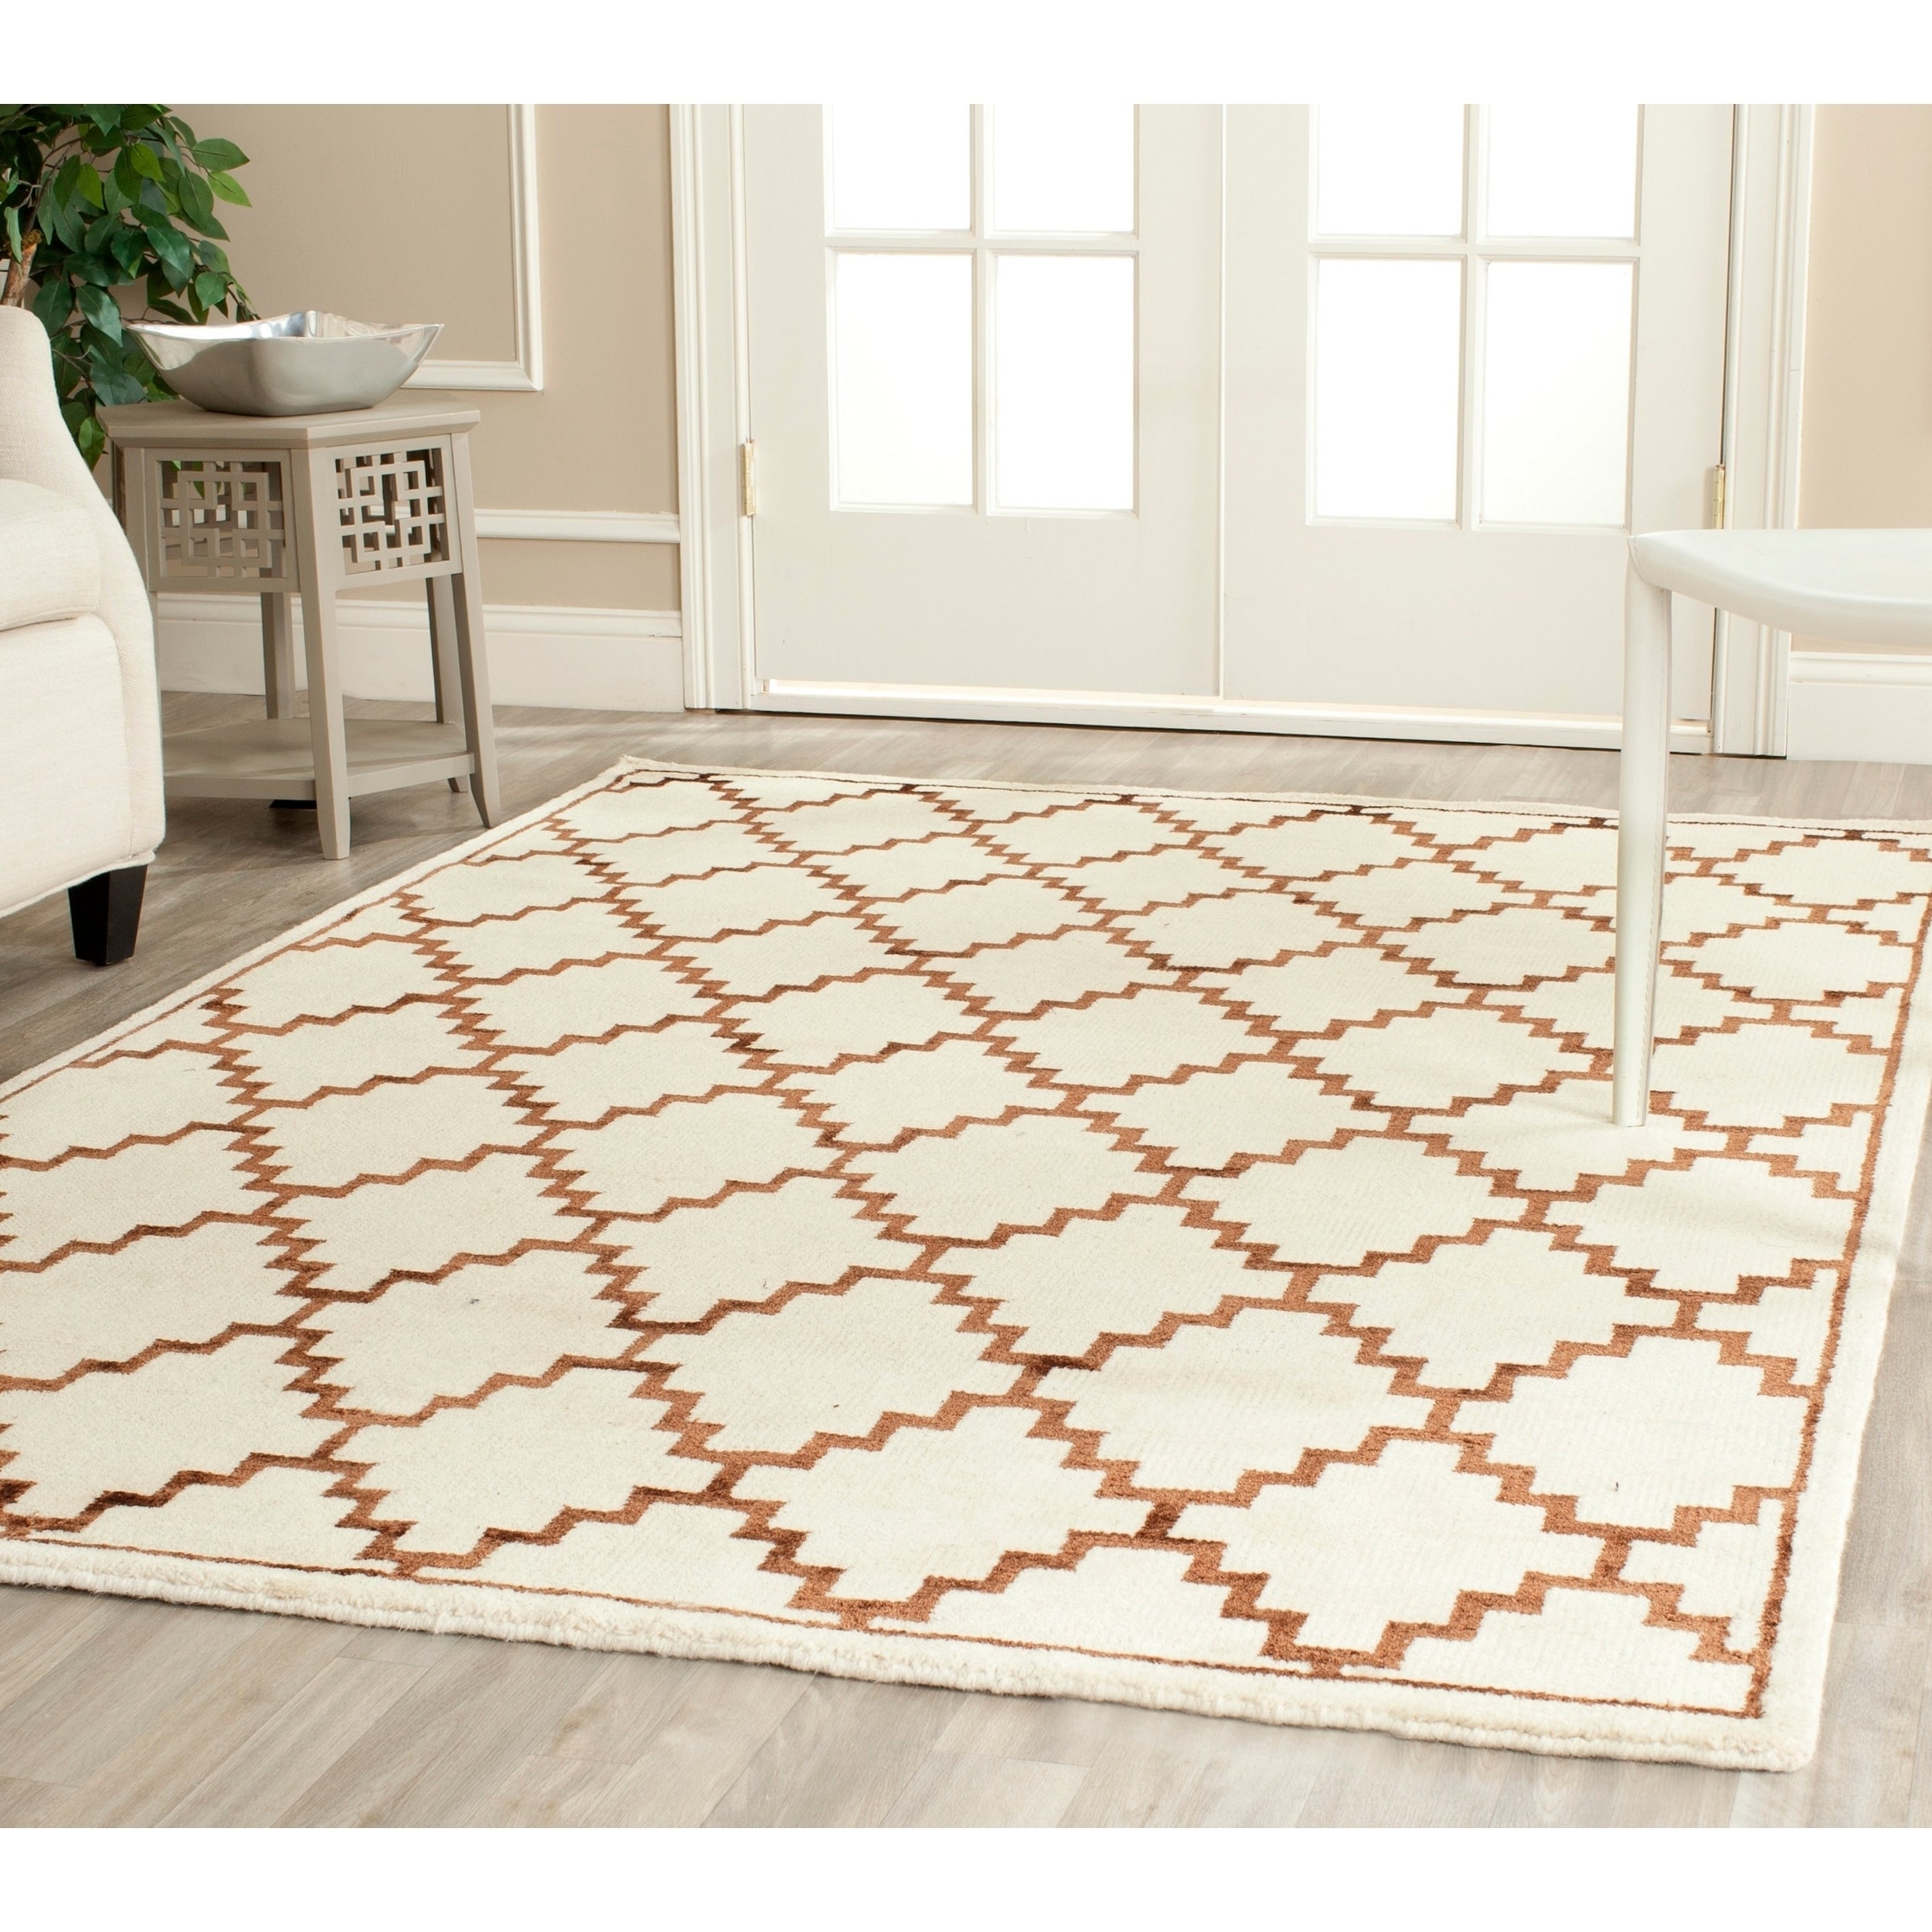 Safavieh Hand knotted Mosaic Ivory/ Brown Wool/ Viscose Rug (5 X 8)